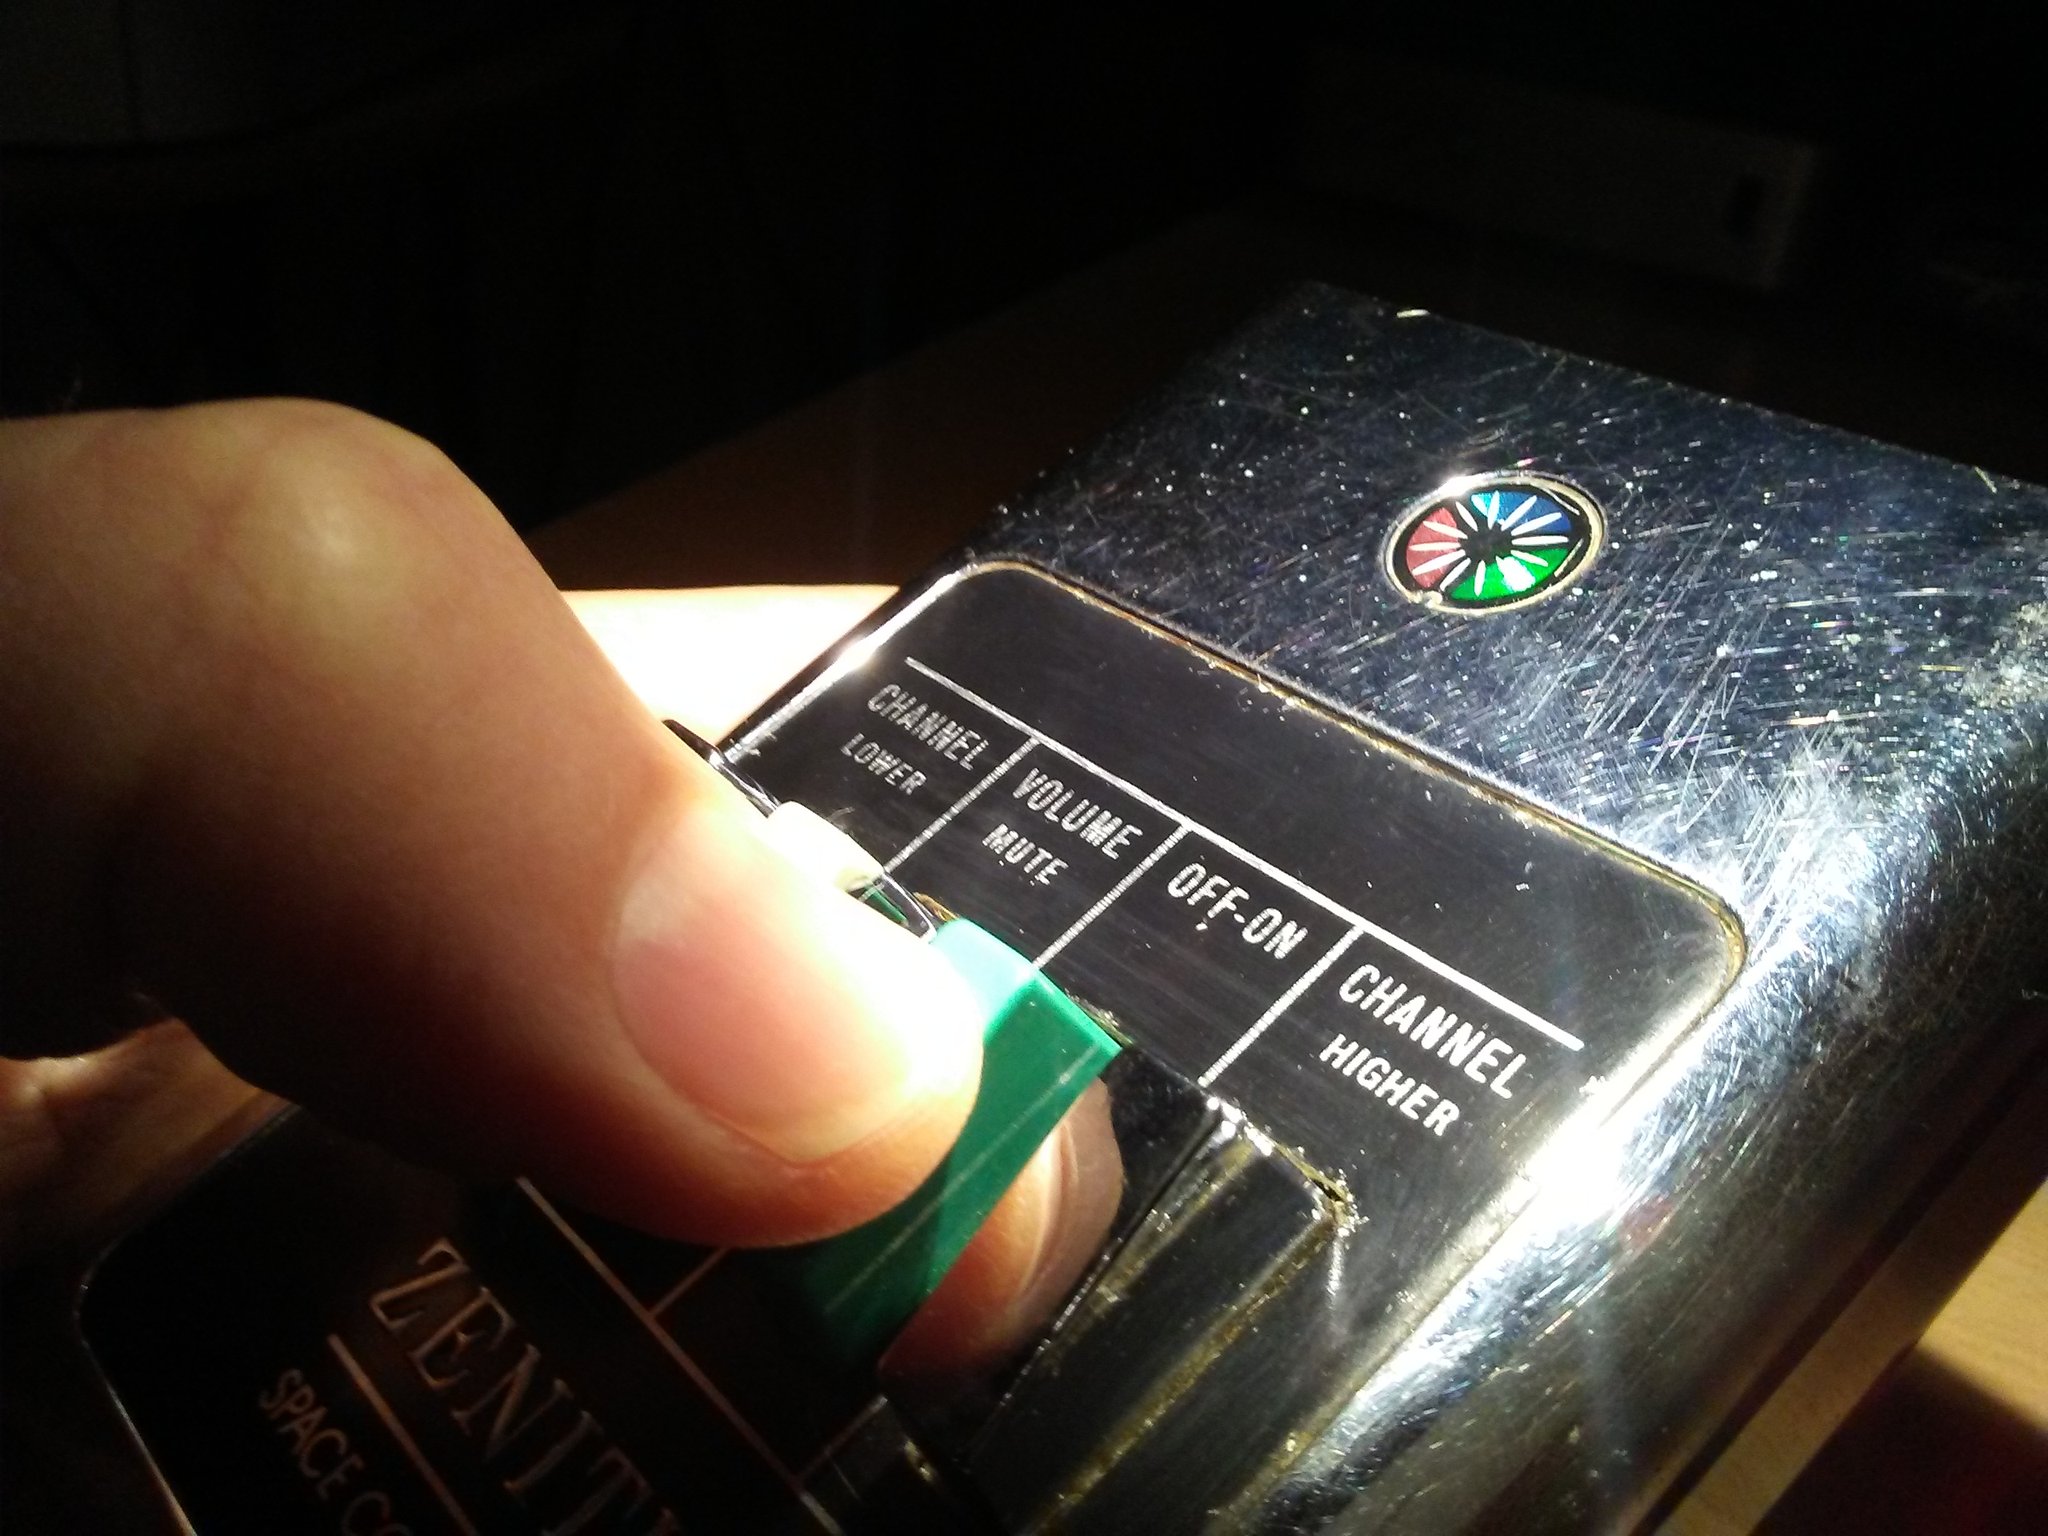 The buttons on Zenith's original 'clicker' TV remote were a